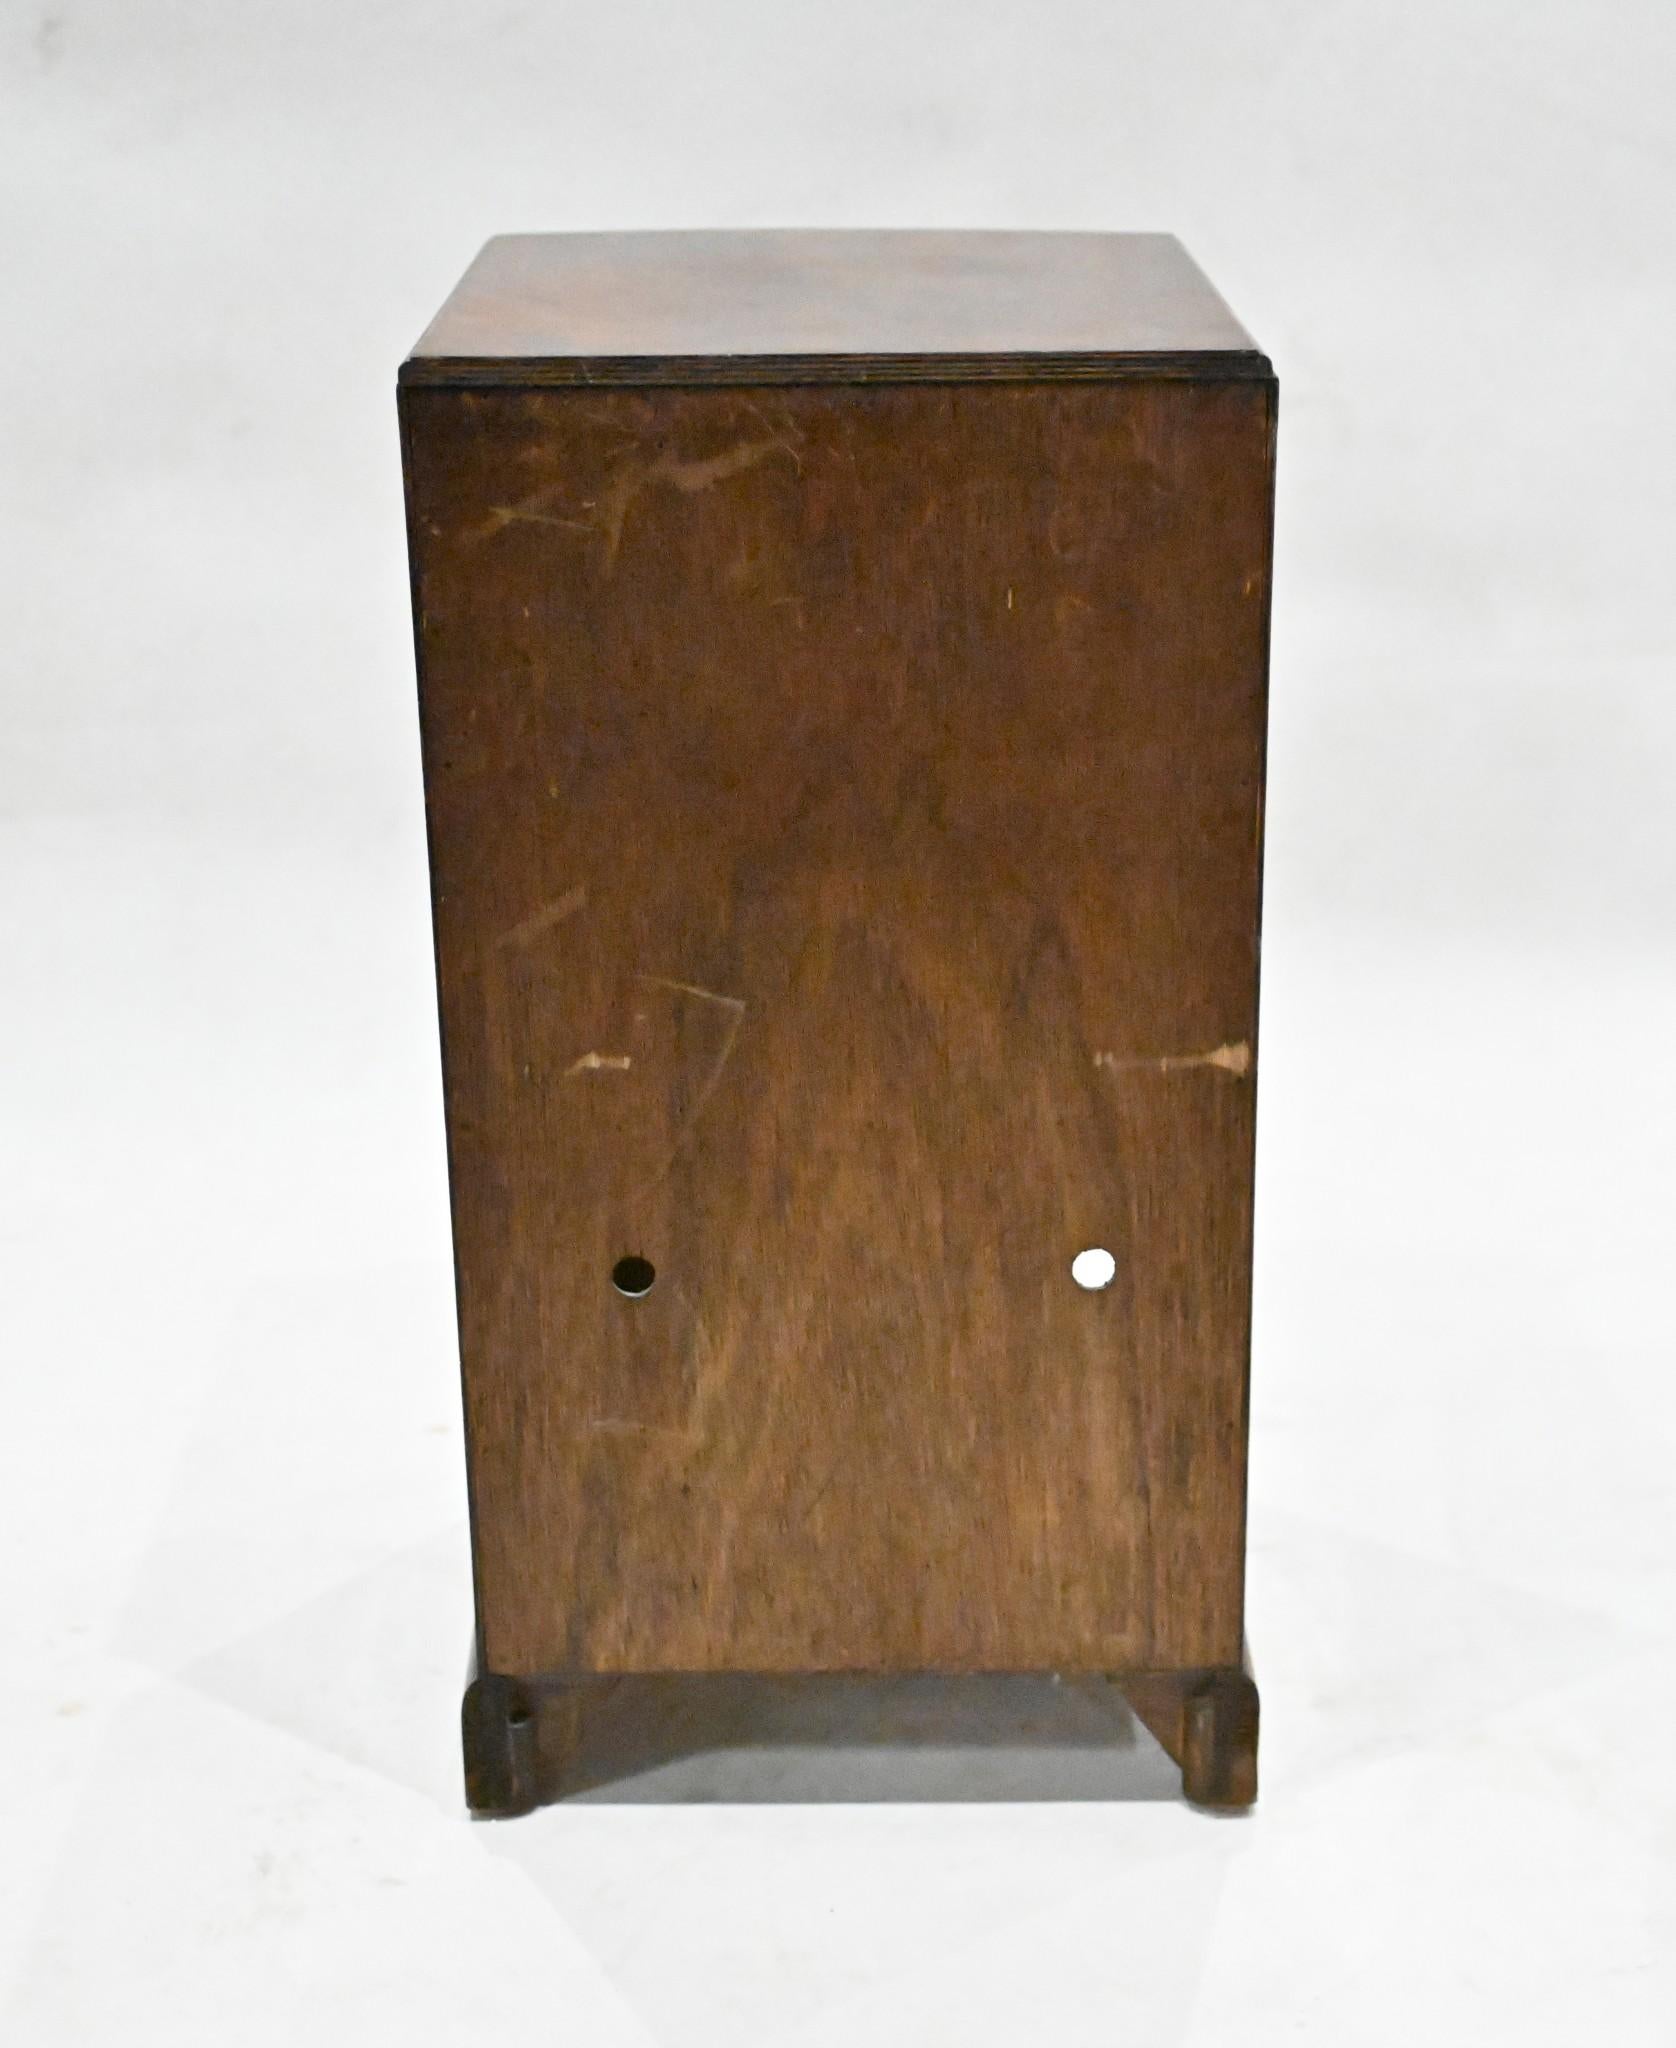 Pair Period Art Deco Bedside Cabinets Nightstands 1920s In Good Condition For Sale In Potters Bar, GB